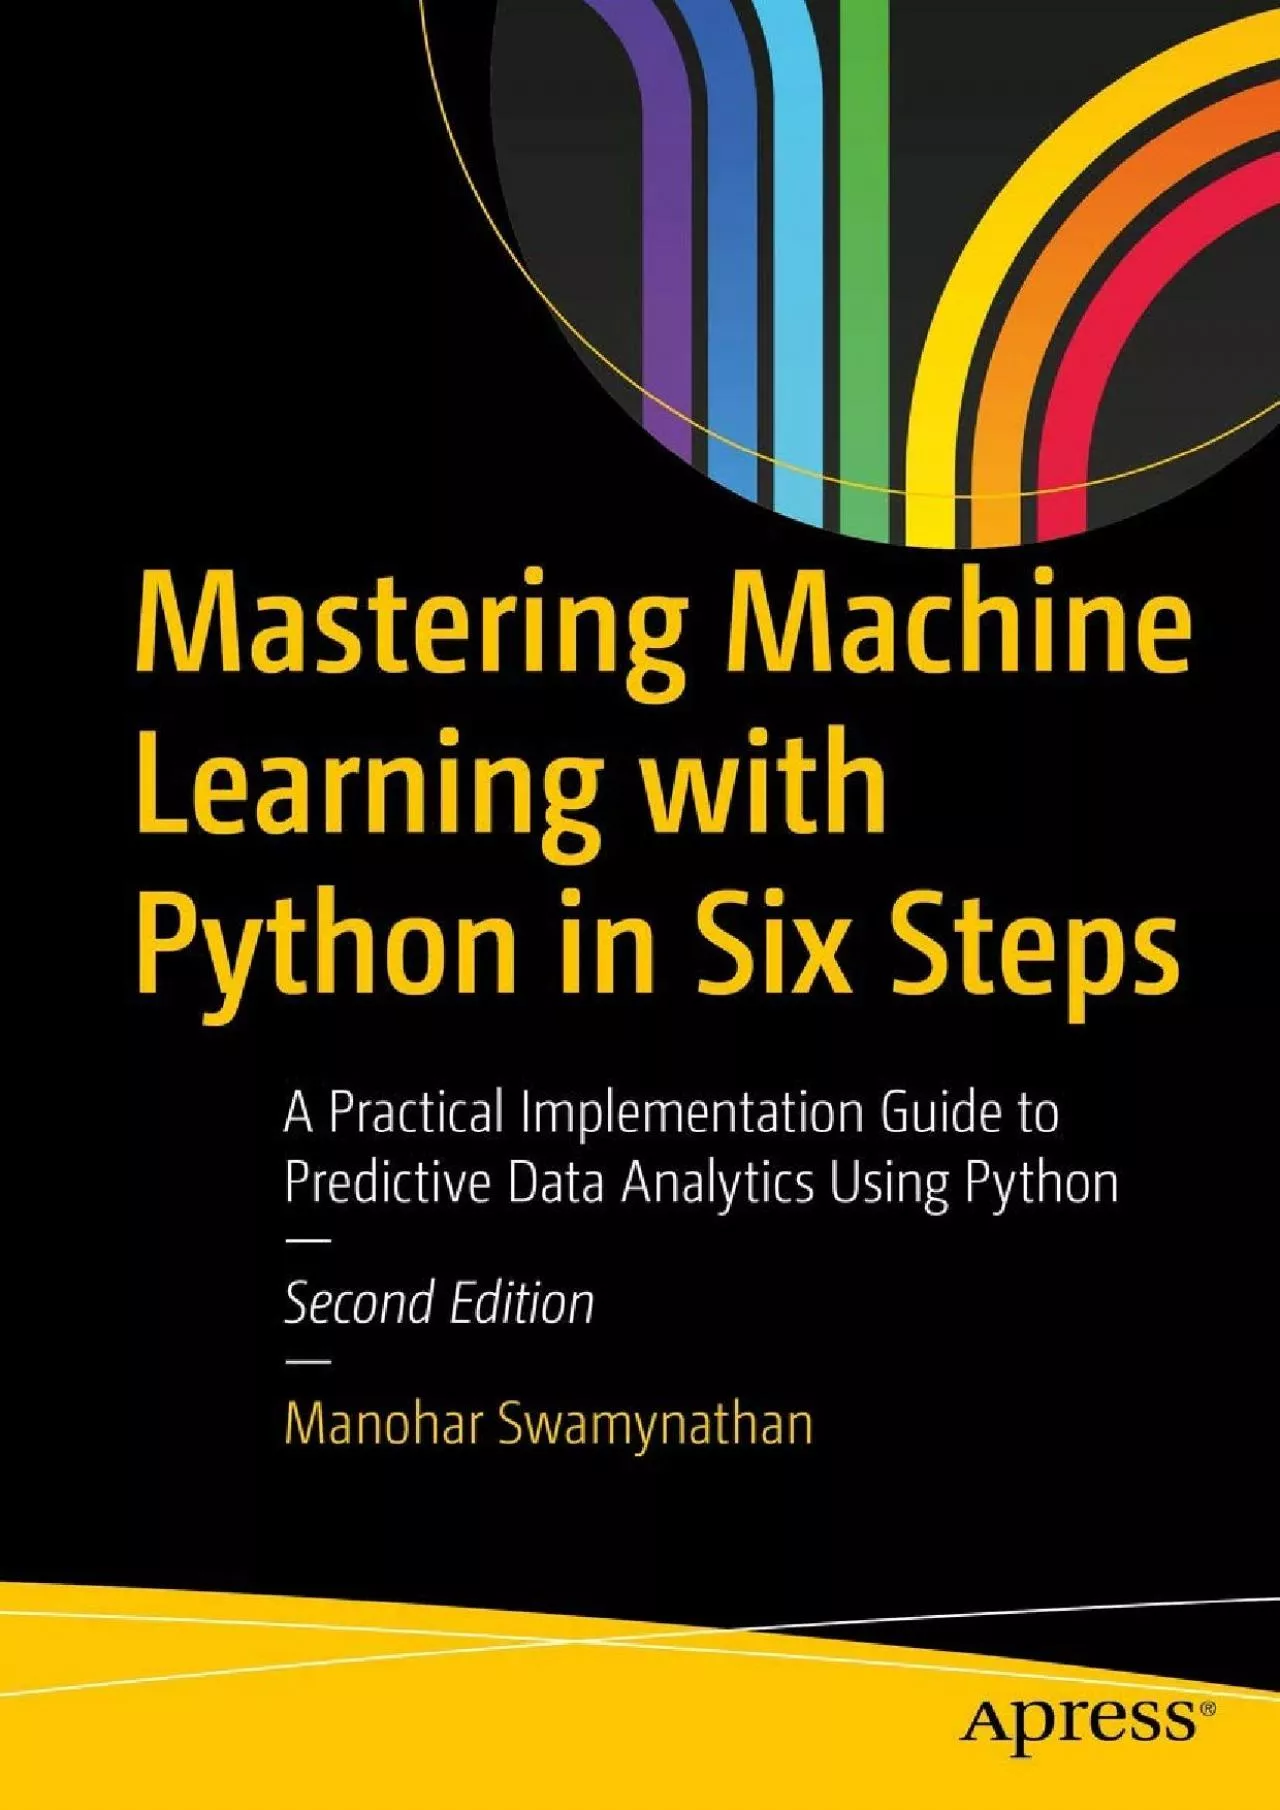 [READING BOOK]-Mastering Machine Learning with Python in Six Steps: A Practical Implementation